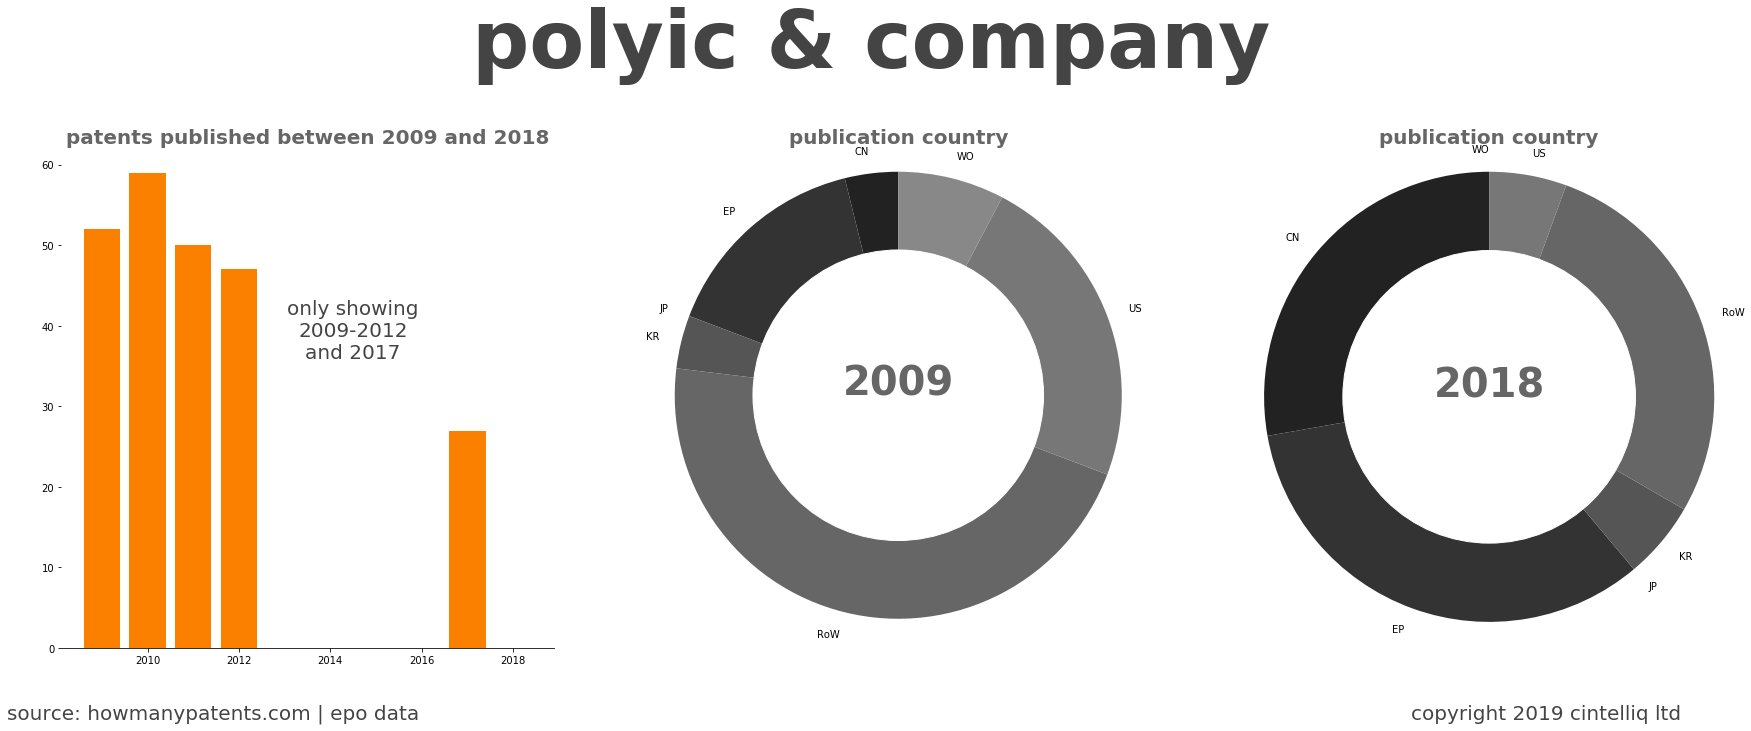 summary of patents for Polyic & Company